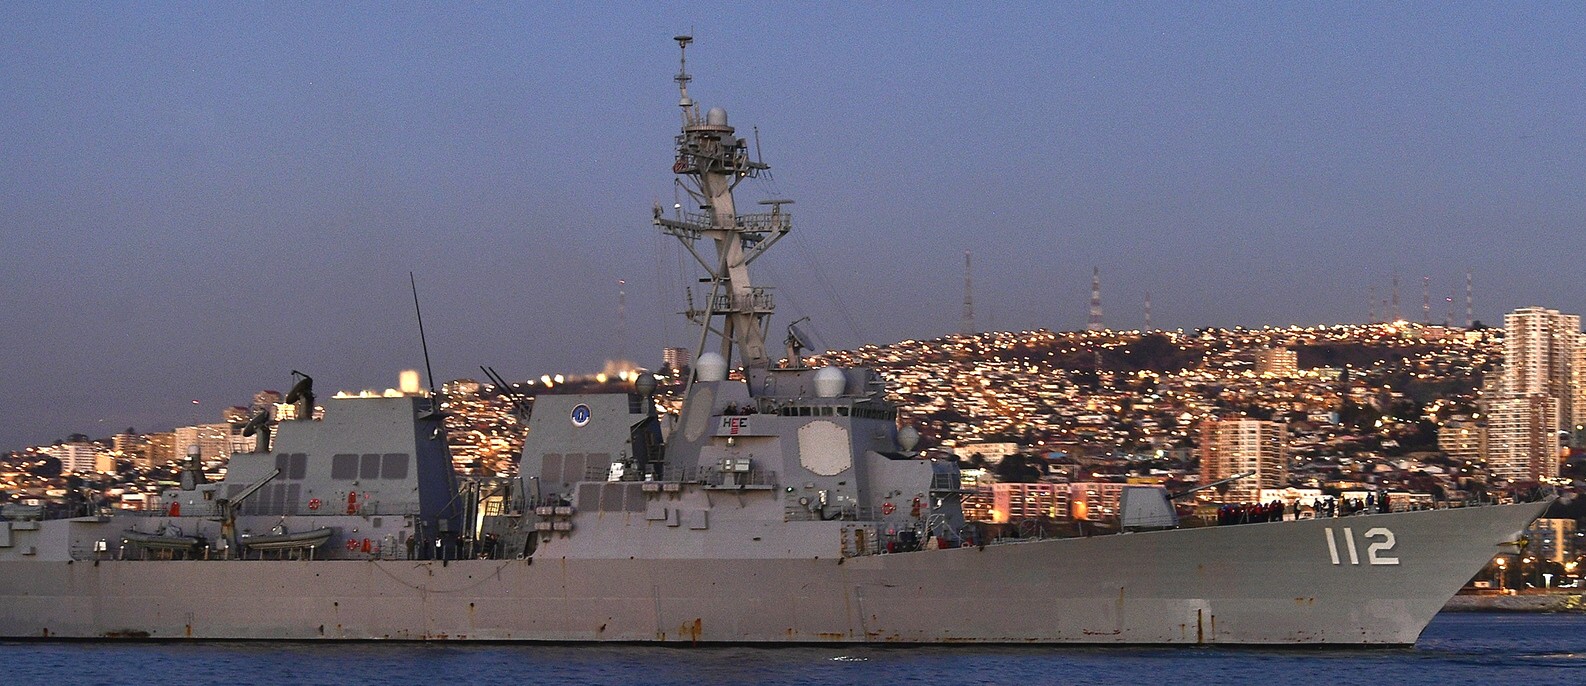 ddg-112 uss michael murphy arleigh burke class guided missile destroyer aegis us navy exercise unitas chile 62